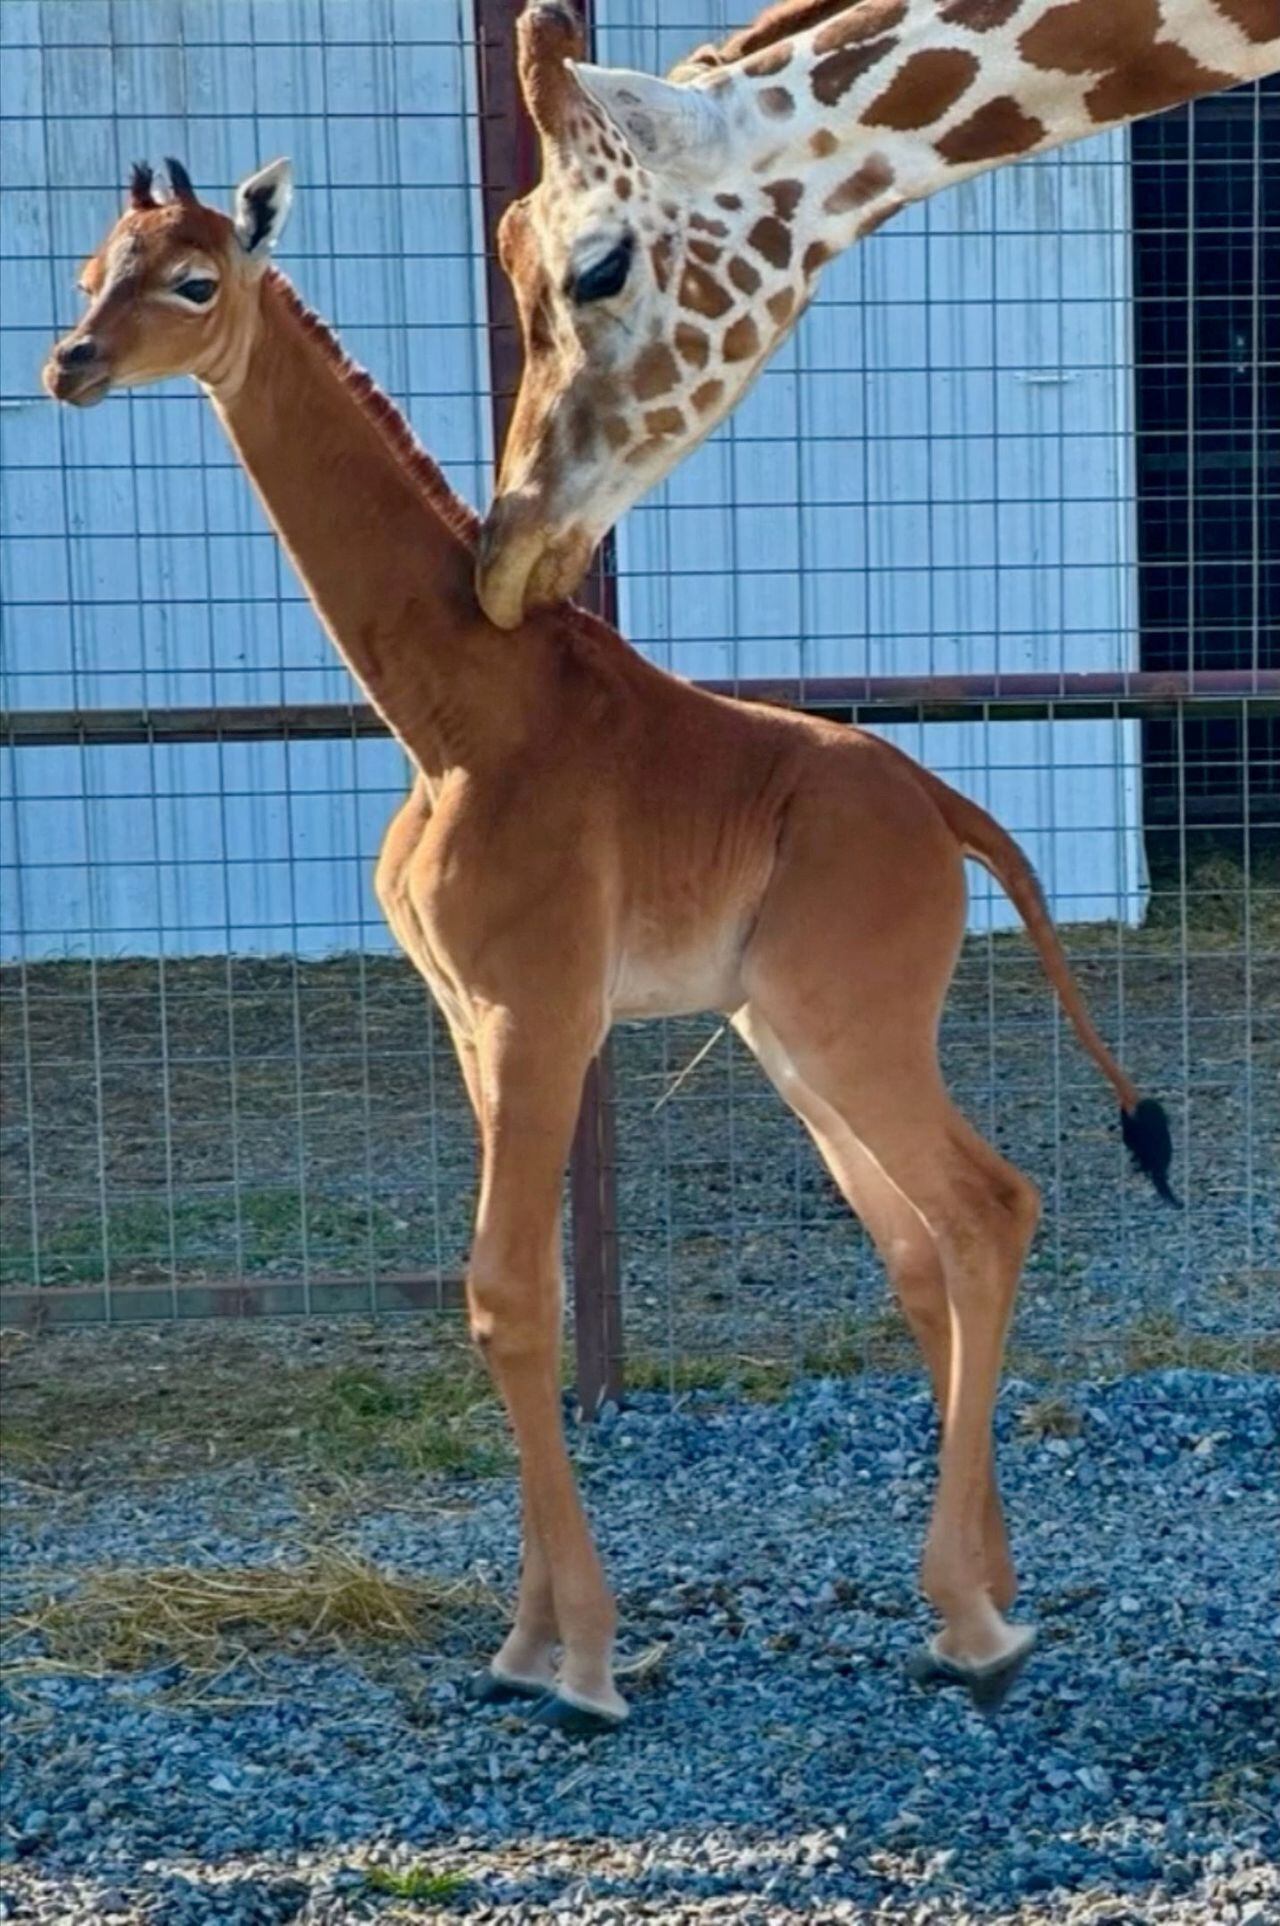 A rare spotless giraffe born at Bright's Zoo is seen in Johnson City, Tennessee, U.S., acquired by REUTERS on August 22, 2023, in a still image taken from a handout video. Bright's Zoo/TMX/Handout via REUTERS    THIS IMAGE HAS BEEN SUPPLIED BY A THIRD PARTY NO RESALES. NO ARCHIVES. MANDATORY CREDIT     TPX IMAGES OF THE DAY